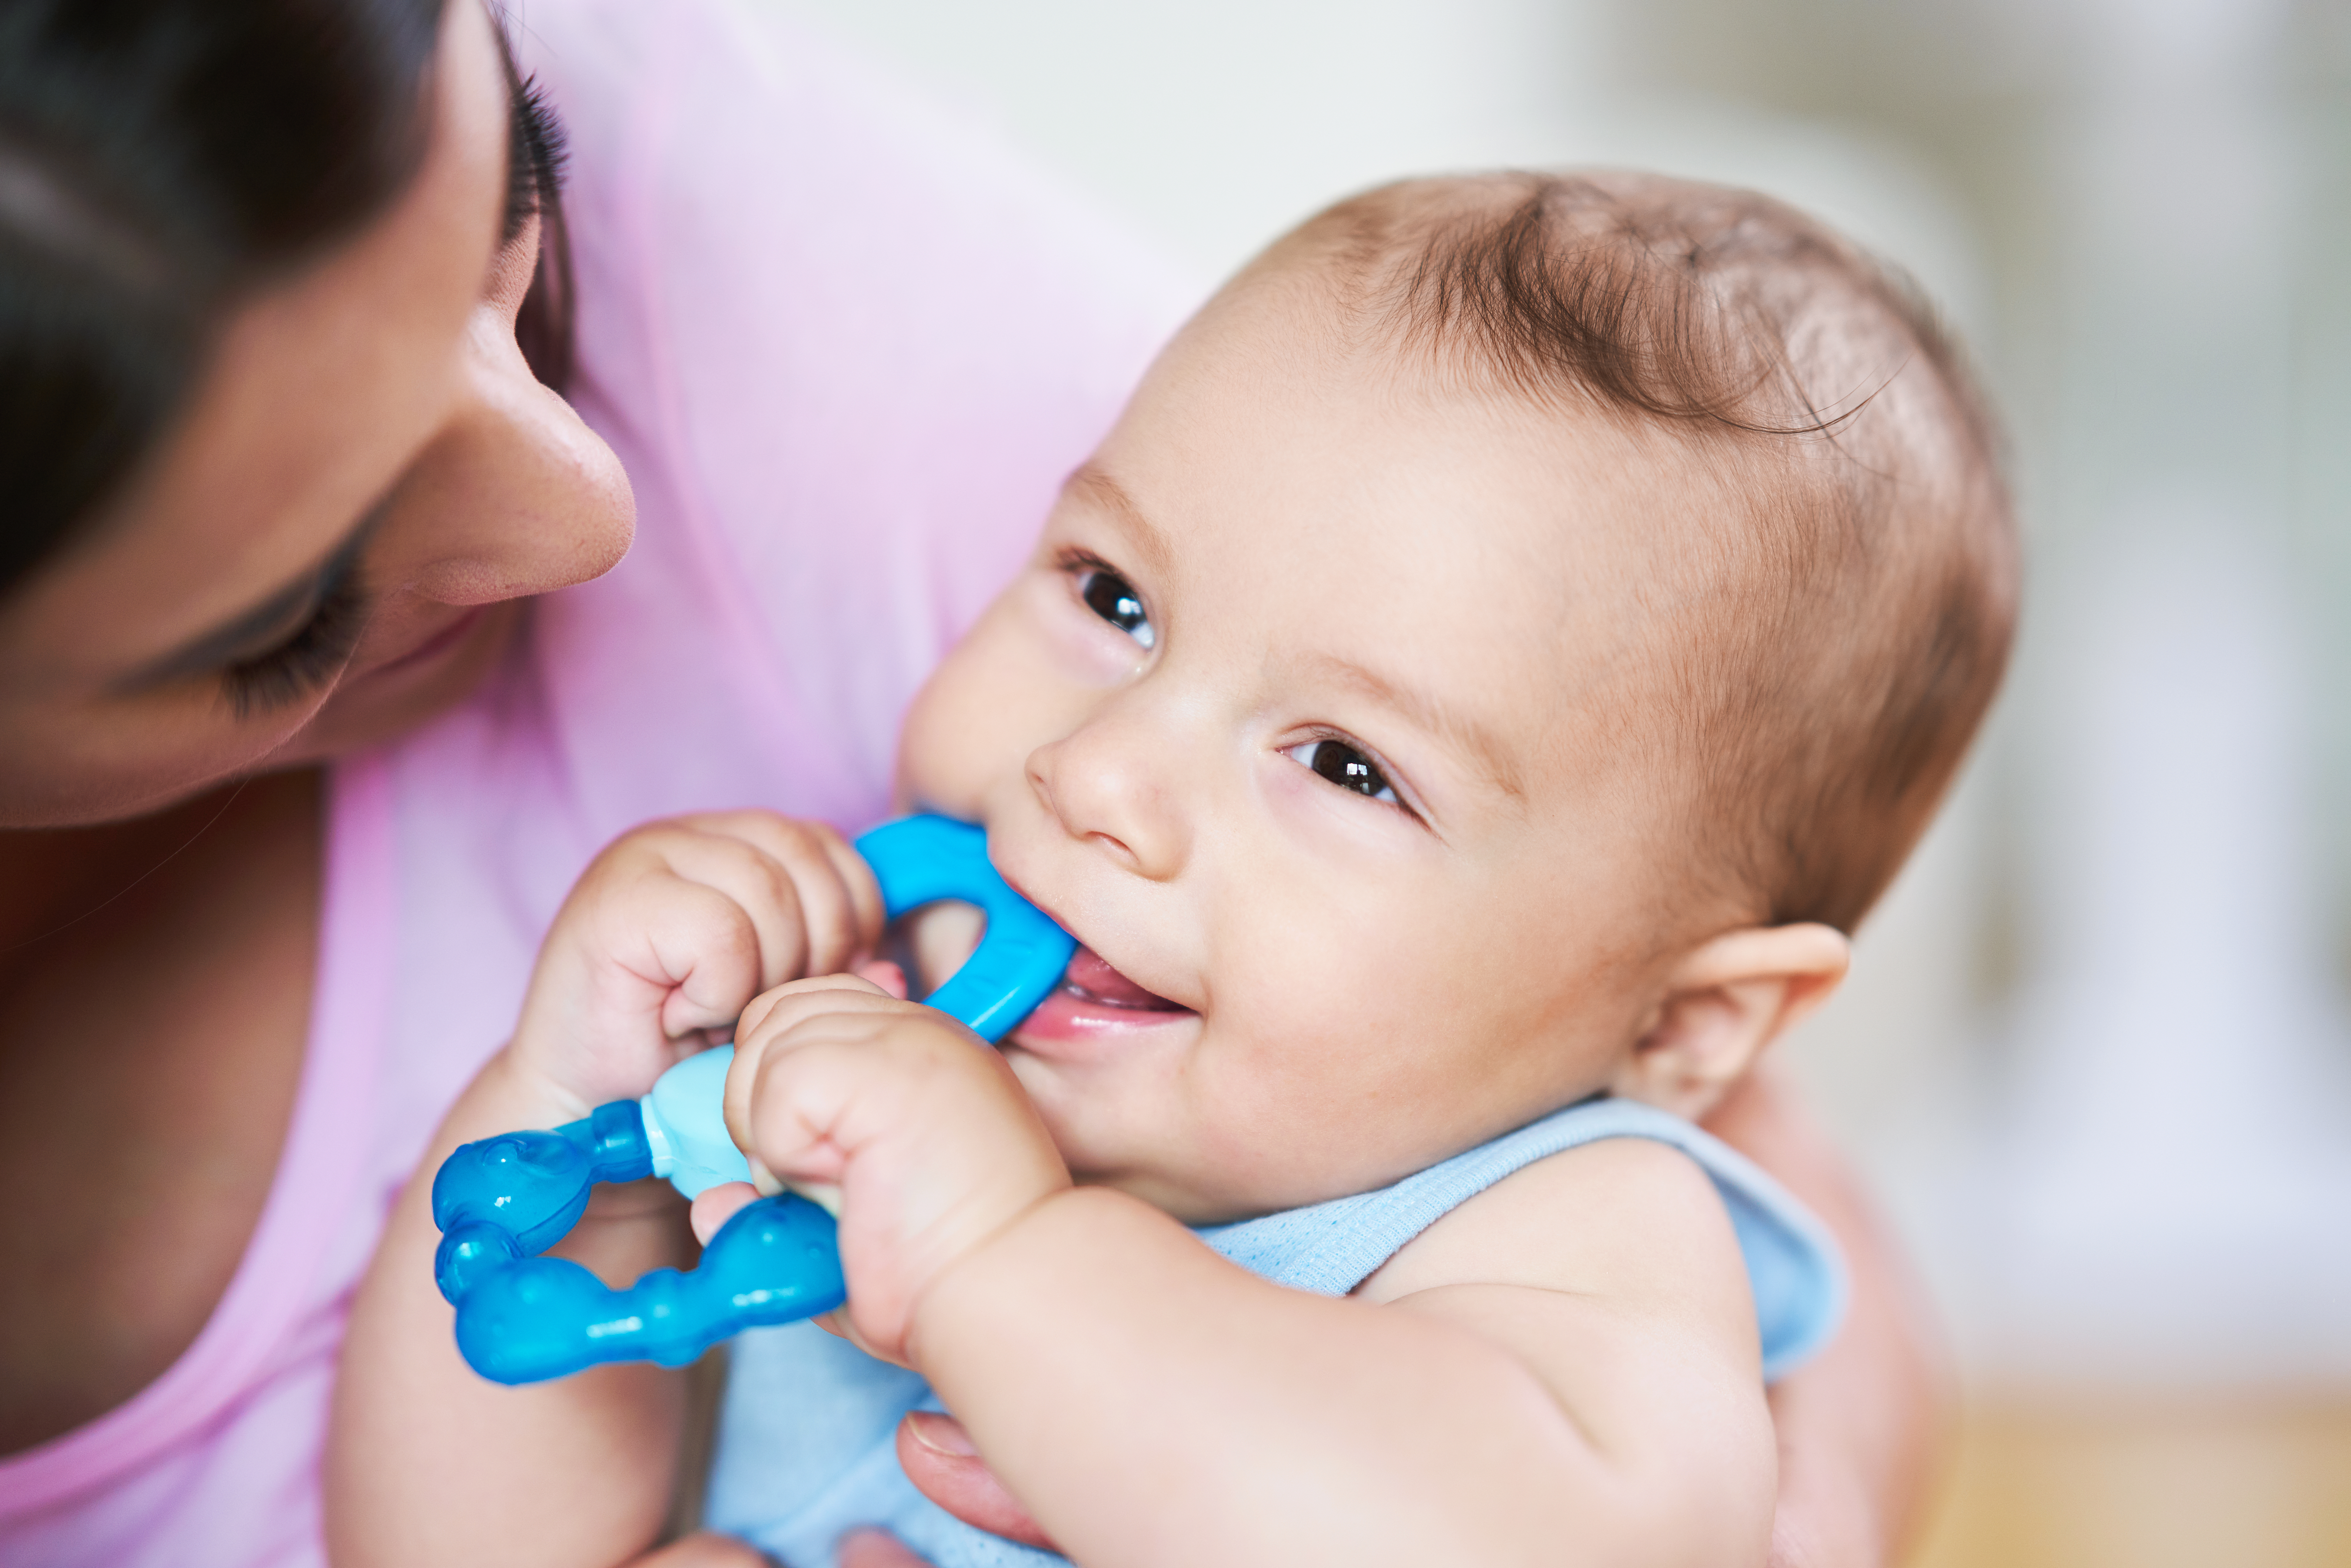 Mom looking at baby bite on blue pacifier